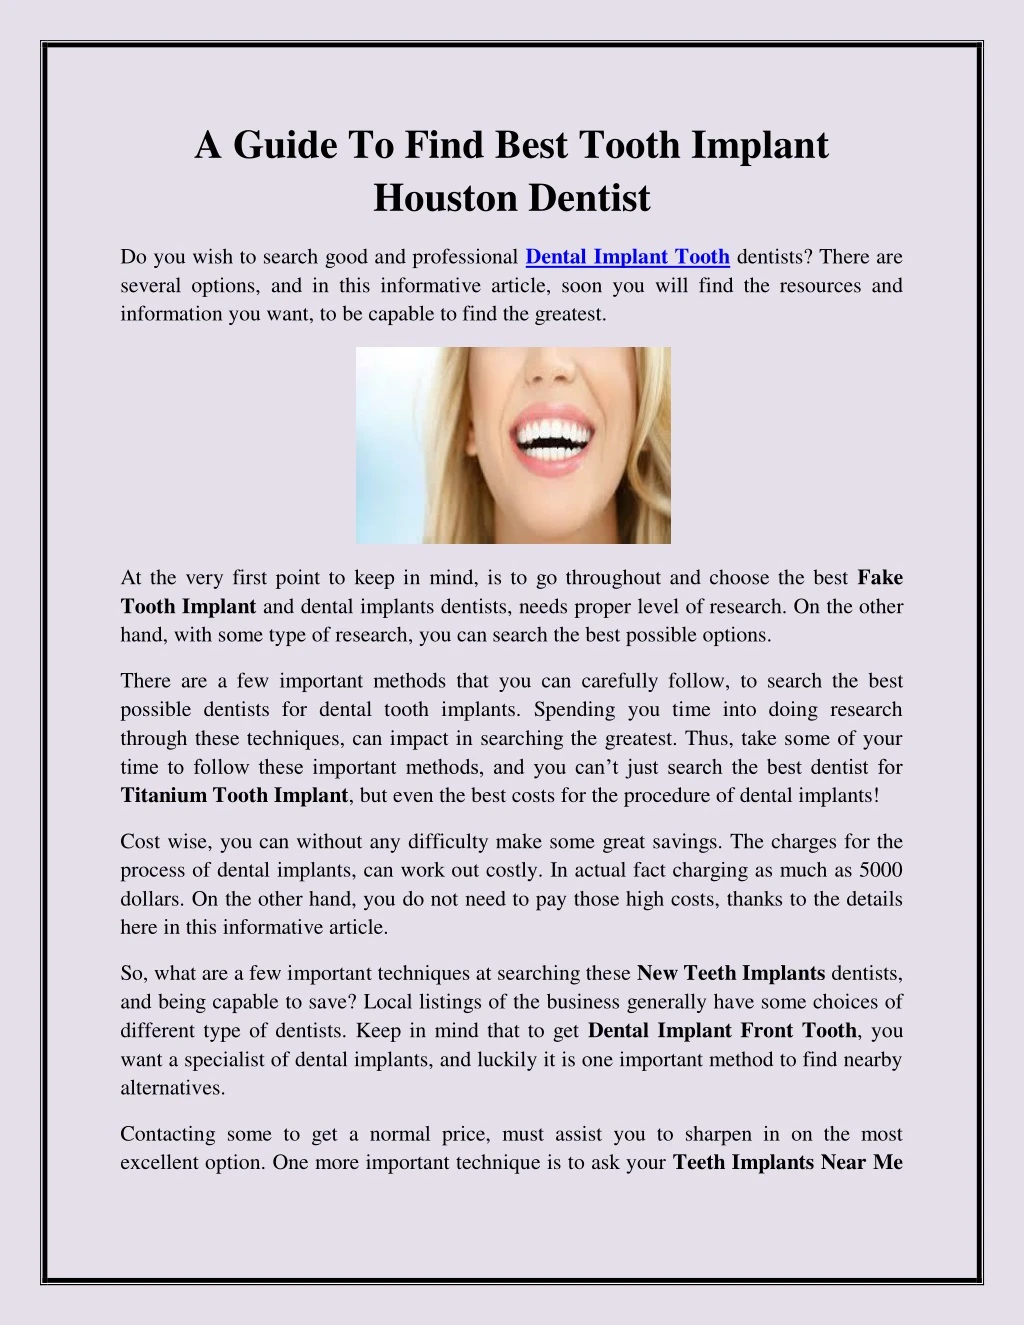 a guide to find best tooth implant houston dentist